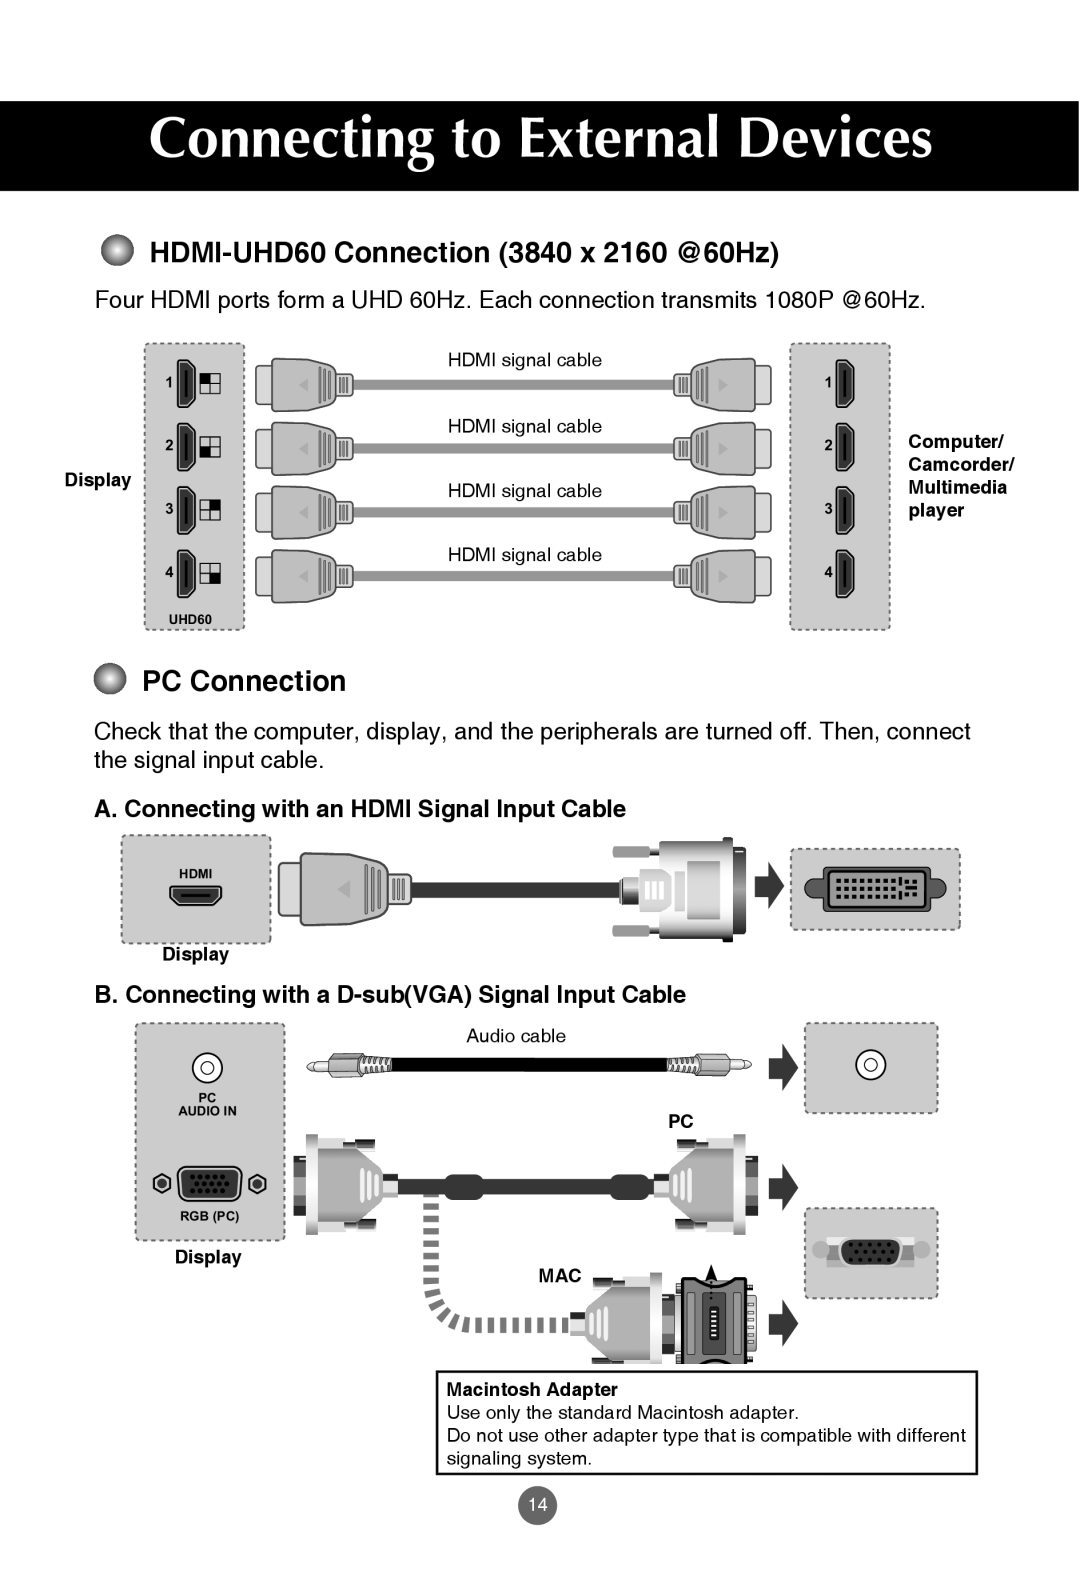 JVC rs-840UD owner manual HDMI-UHD60 Connection 3840 x 2160 @60Hz, PC Connection, Connecting to External Devices, Hdmi 